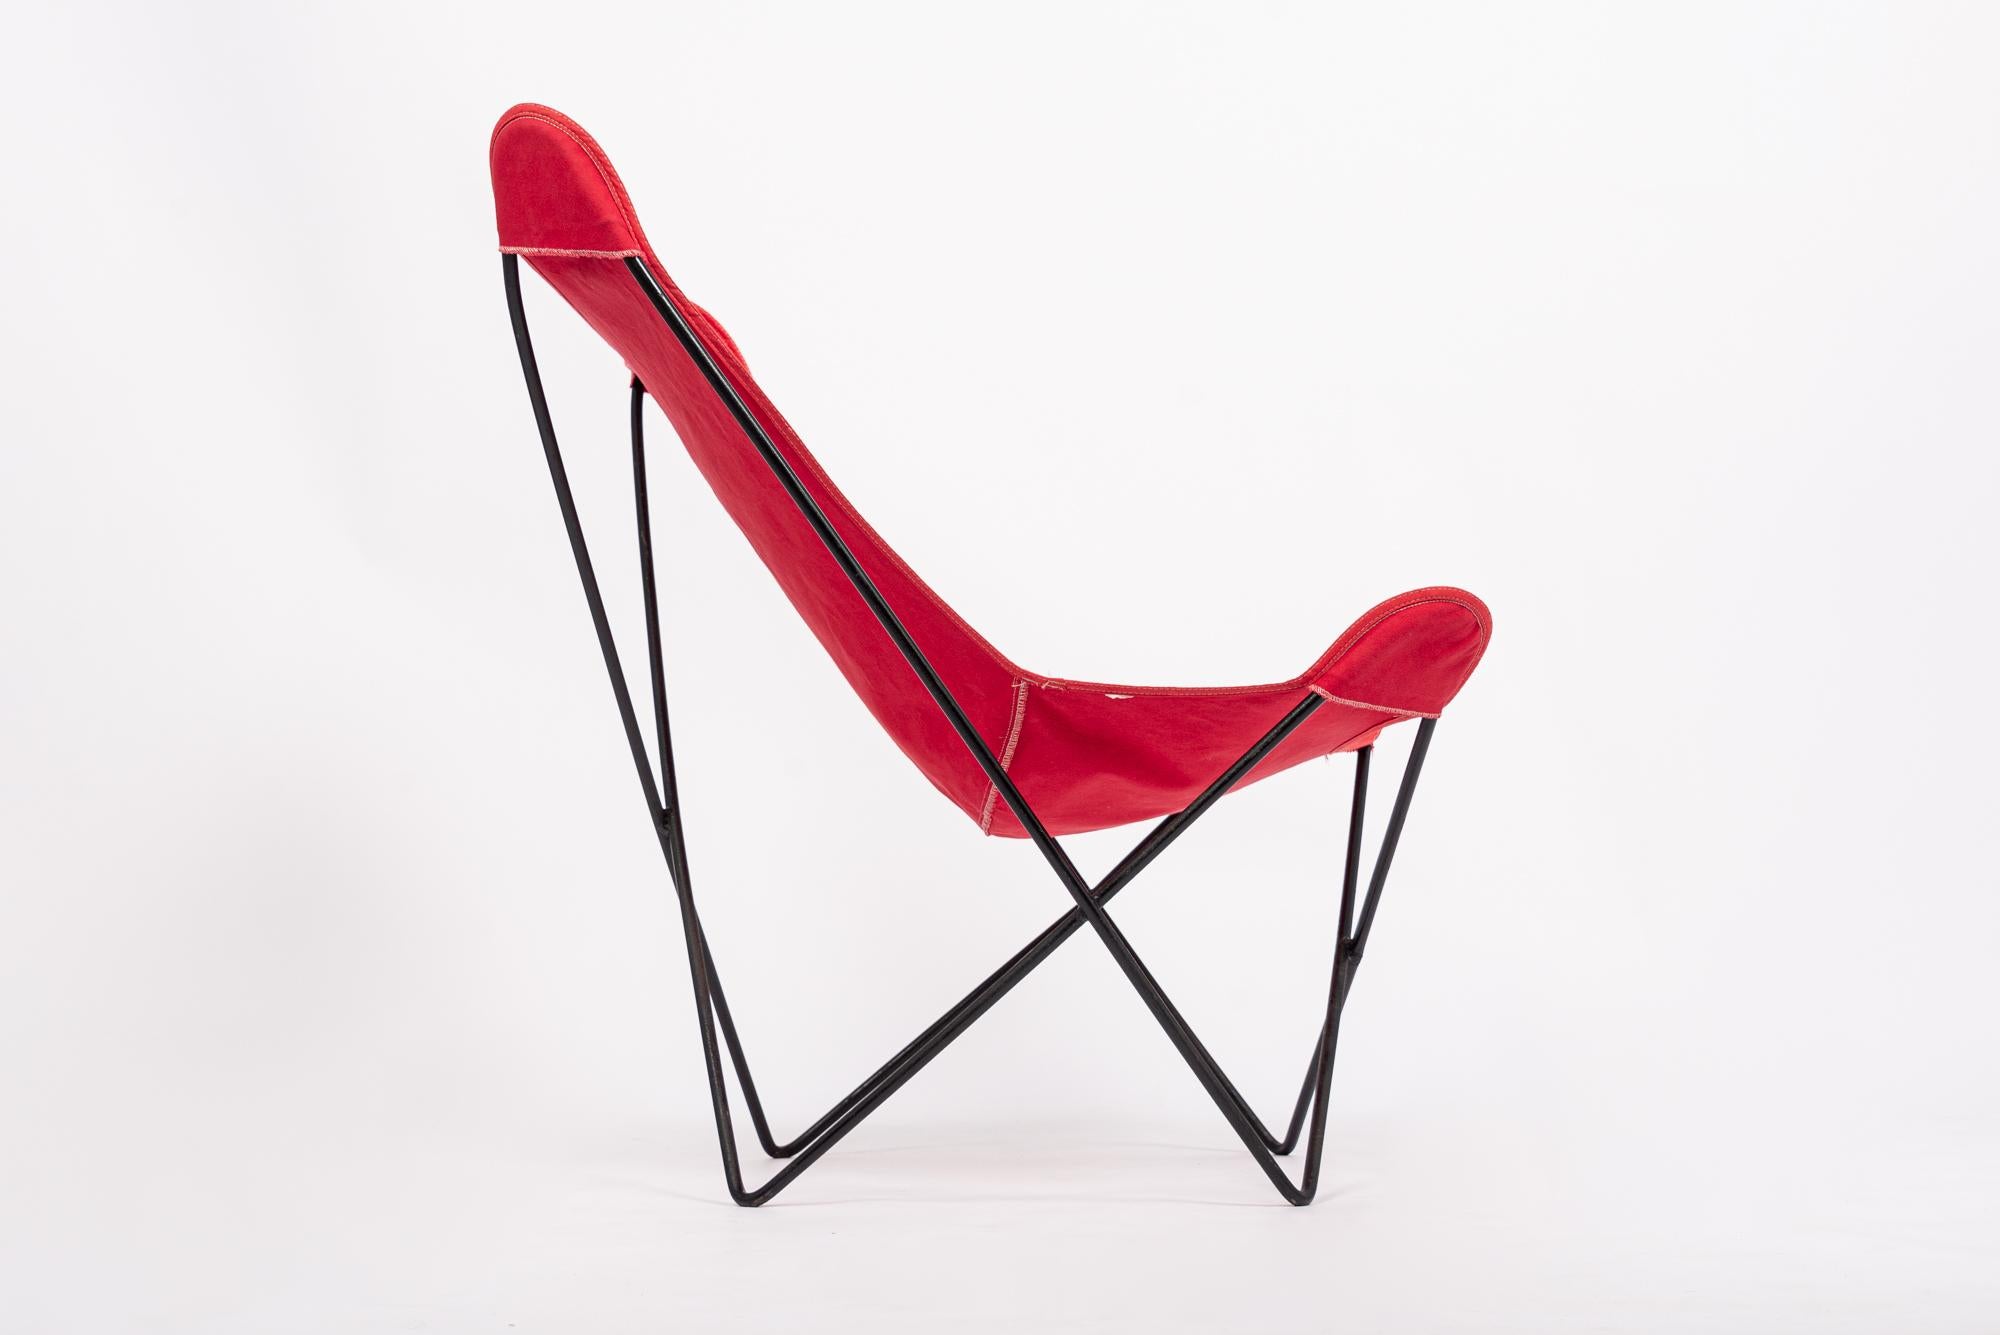 This original vintage mid century modern Knoll (attr.) butterfly chair was originally designed by BKF Hardoy in 1938 in Argentina and later produced by Knoll. This iconic chair features an inventive design with simple, clean lines for use in both